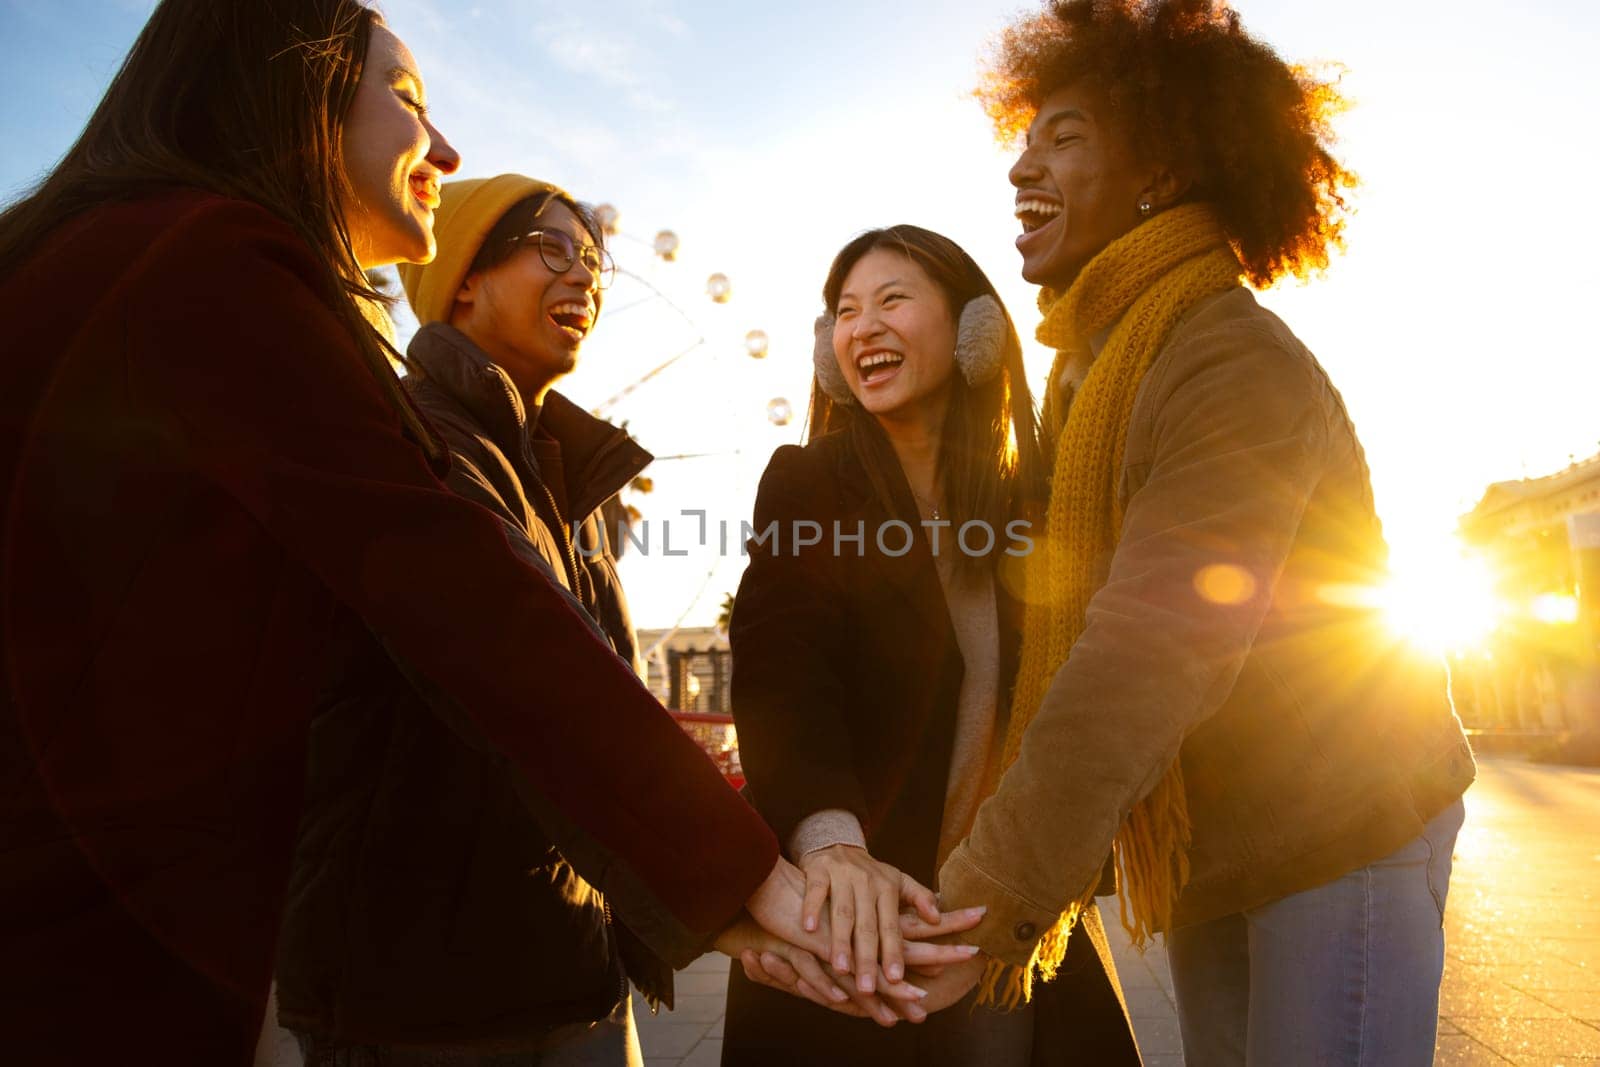 Group of multiracial college students stack hands together in a circle as symbol of community and friendship outdoors on a winter day. Community and cooperation concepts.